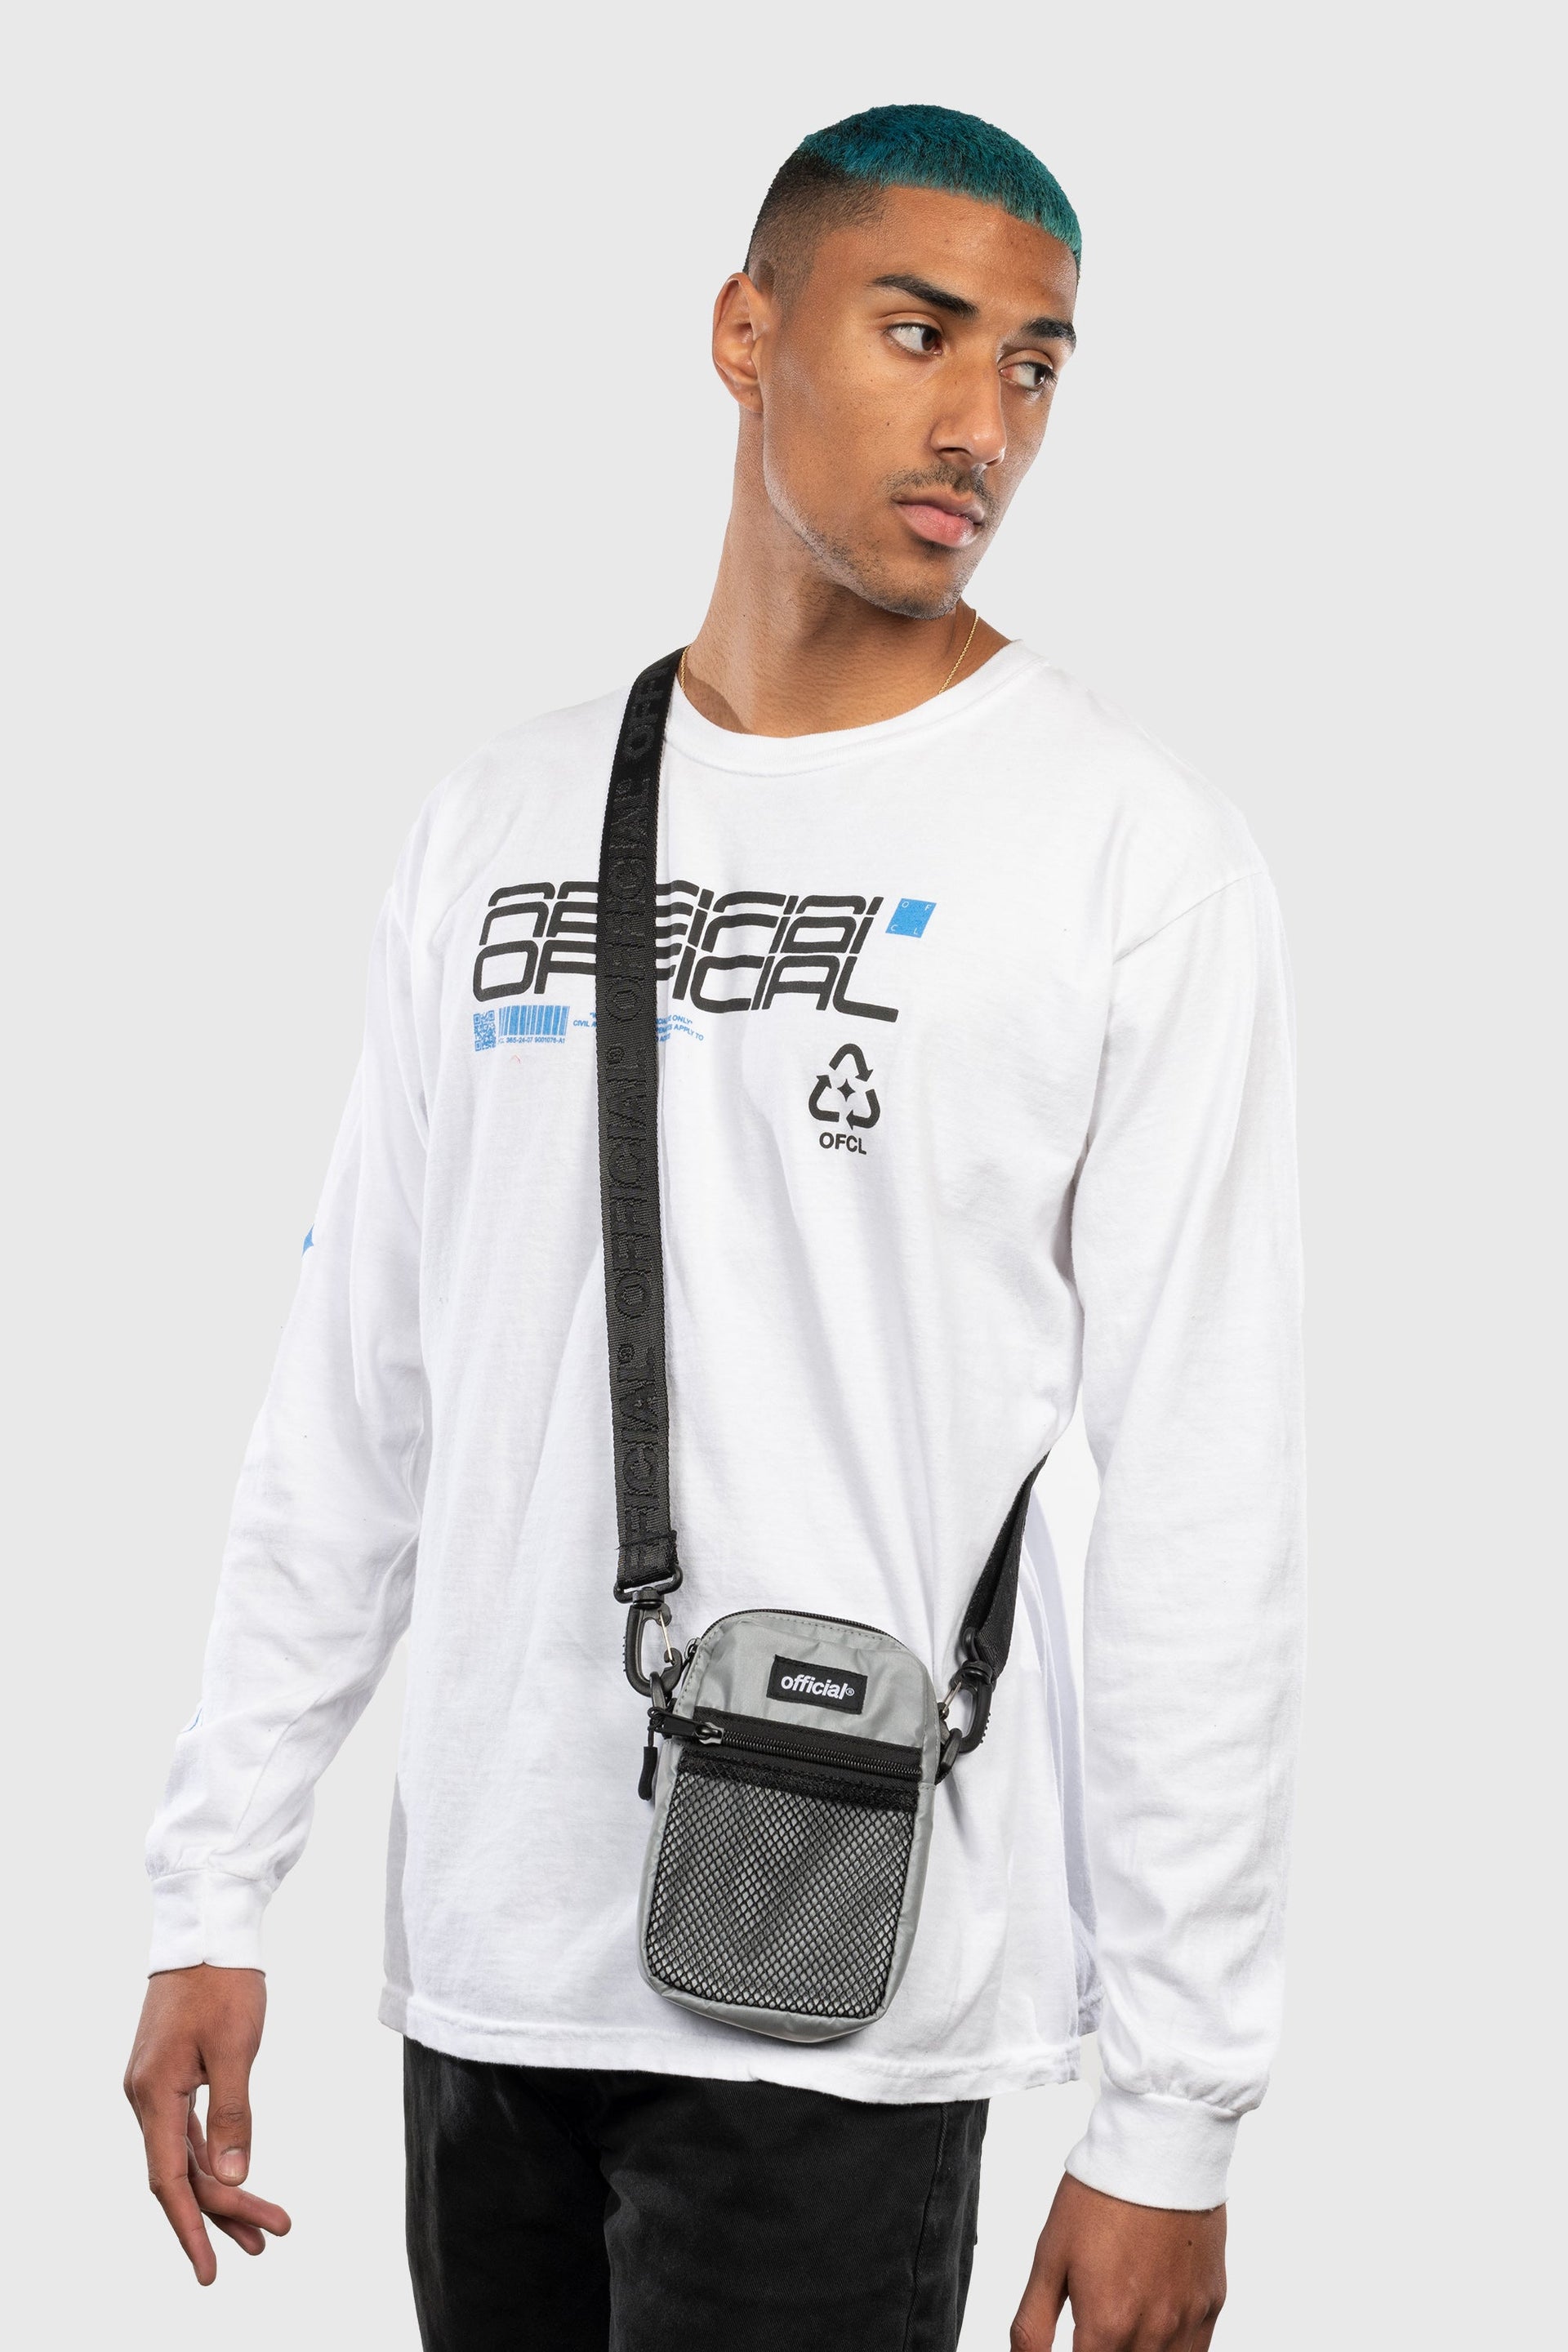 The Reflective 3M Essential Nylon Shoulder Bag Streetwear | Official Reflective Silver being used